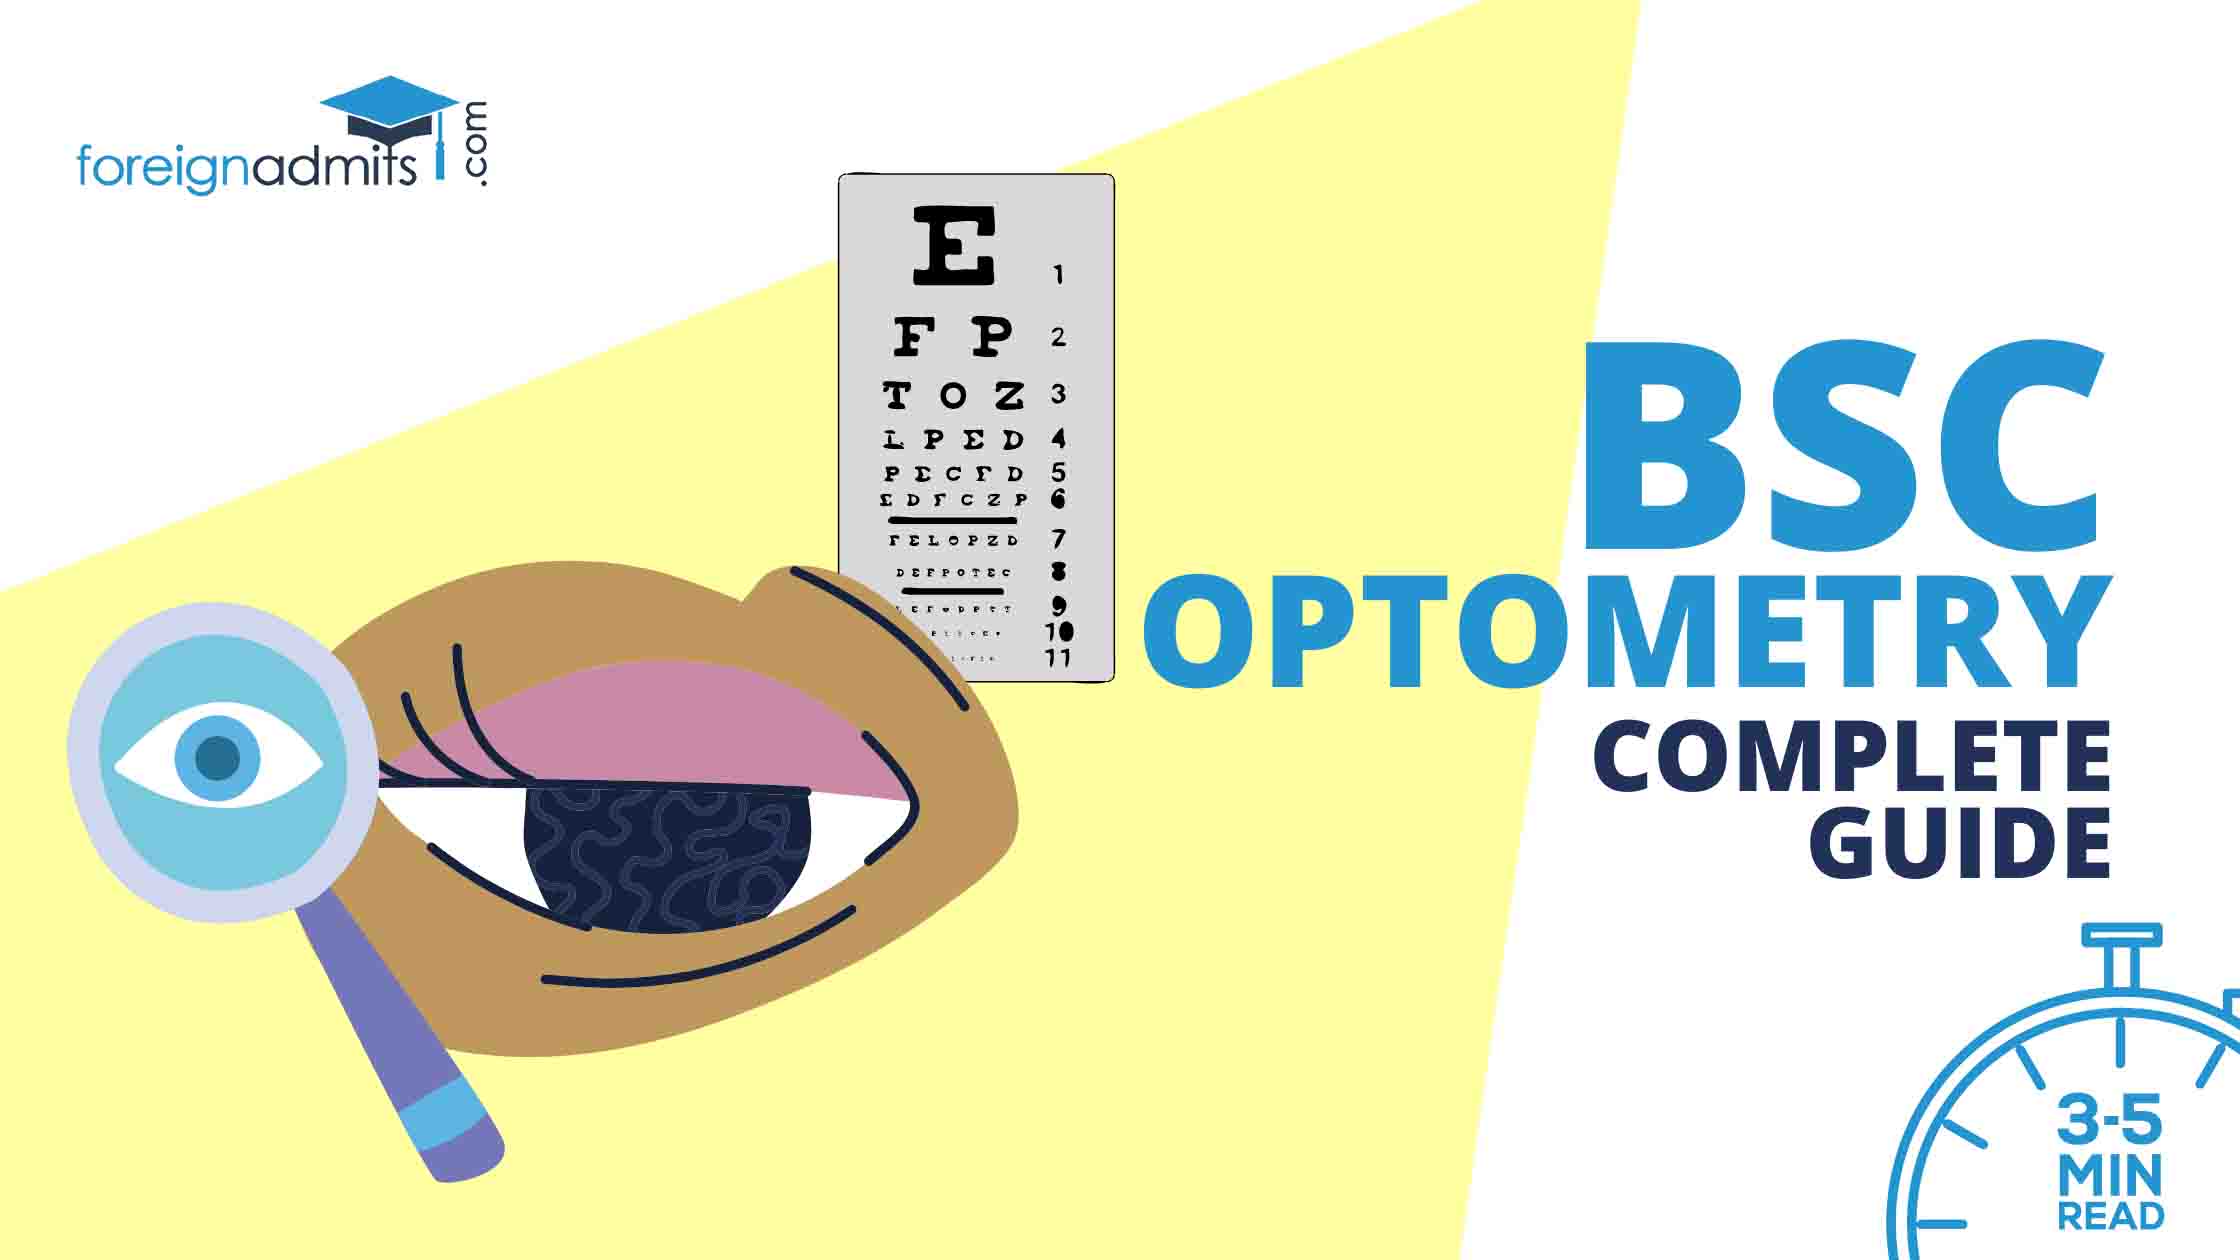 BSc Optometry – Complete Guide